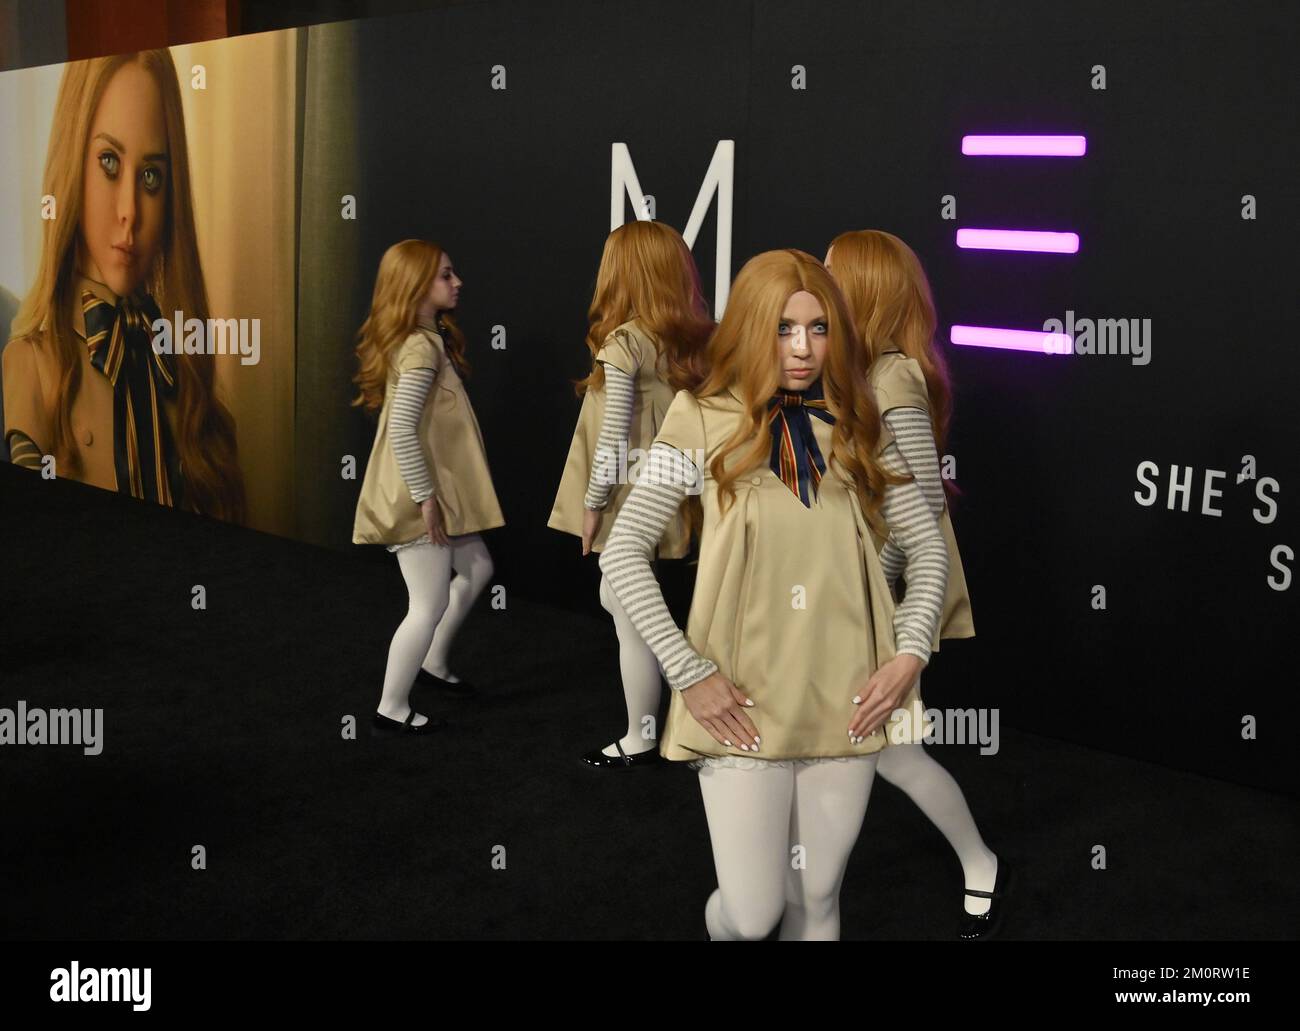 Los Angeles, United States. 07th Dec, 2022. Dancers dressed in the character of the robotic doll in the film, perform on the black carpet during the premiere of the motion picture sci-fi horror thriller M3GAN' at the TCL Theatre in the Hollywood section of Los Angeles on Wednesday, December 7, 2022. Storyline: A robotics engineer at a toy company builds a life-like doll that begins to take on a life of its own. Photo by Jim Ruymen/UPI Credit: UPI/Alamy Live News Stock Photo